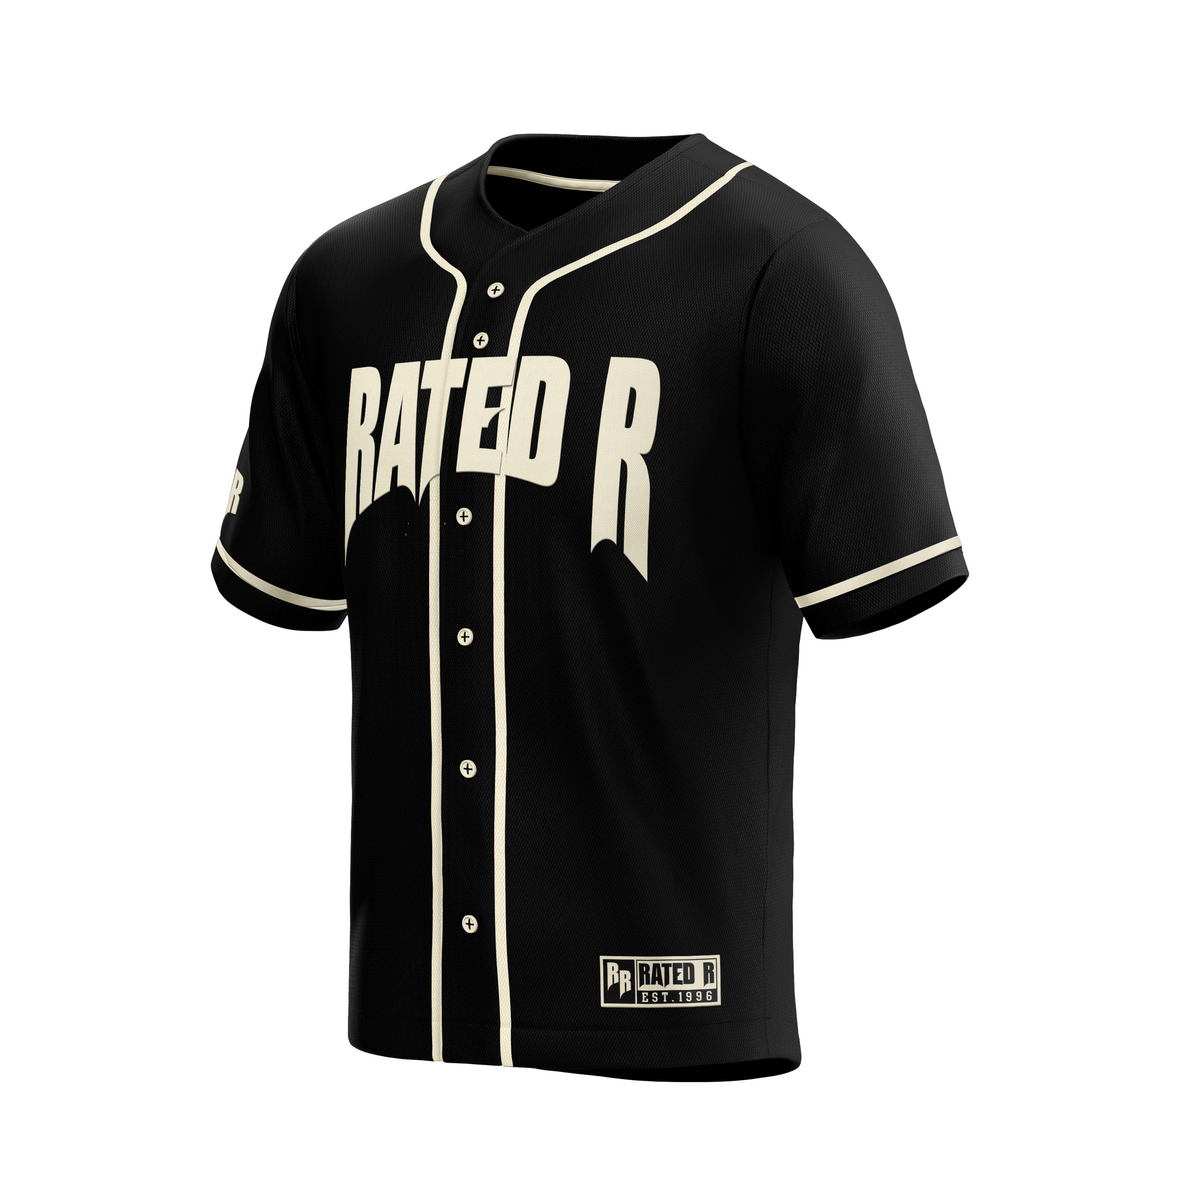 RATED R BASEBALL JERSEY